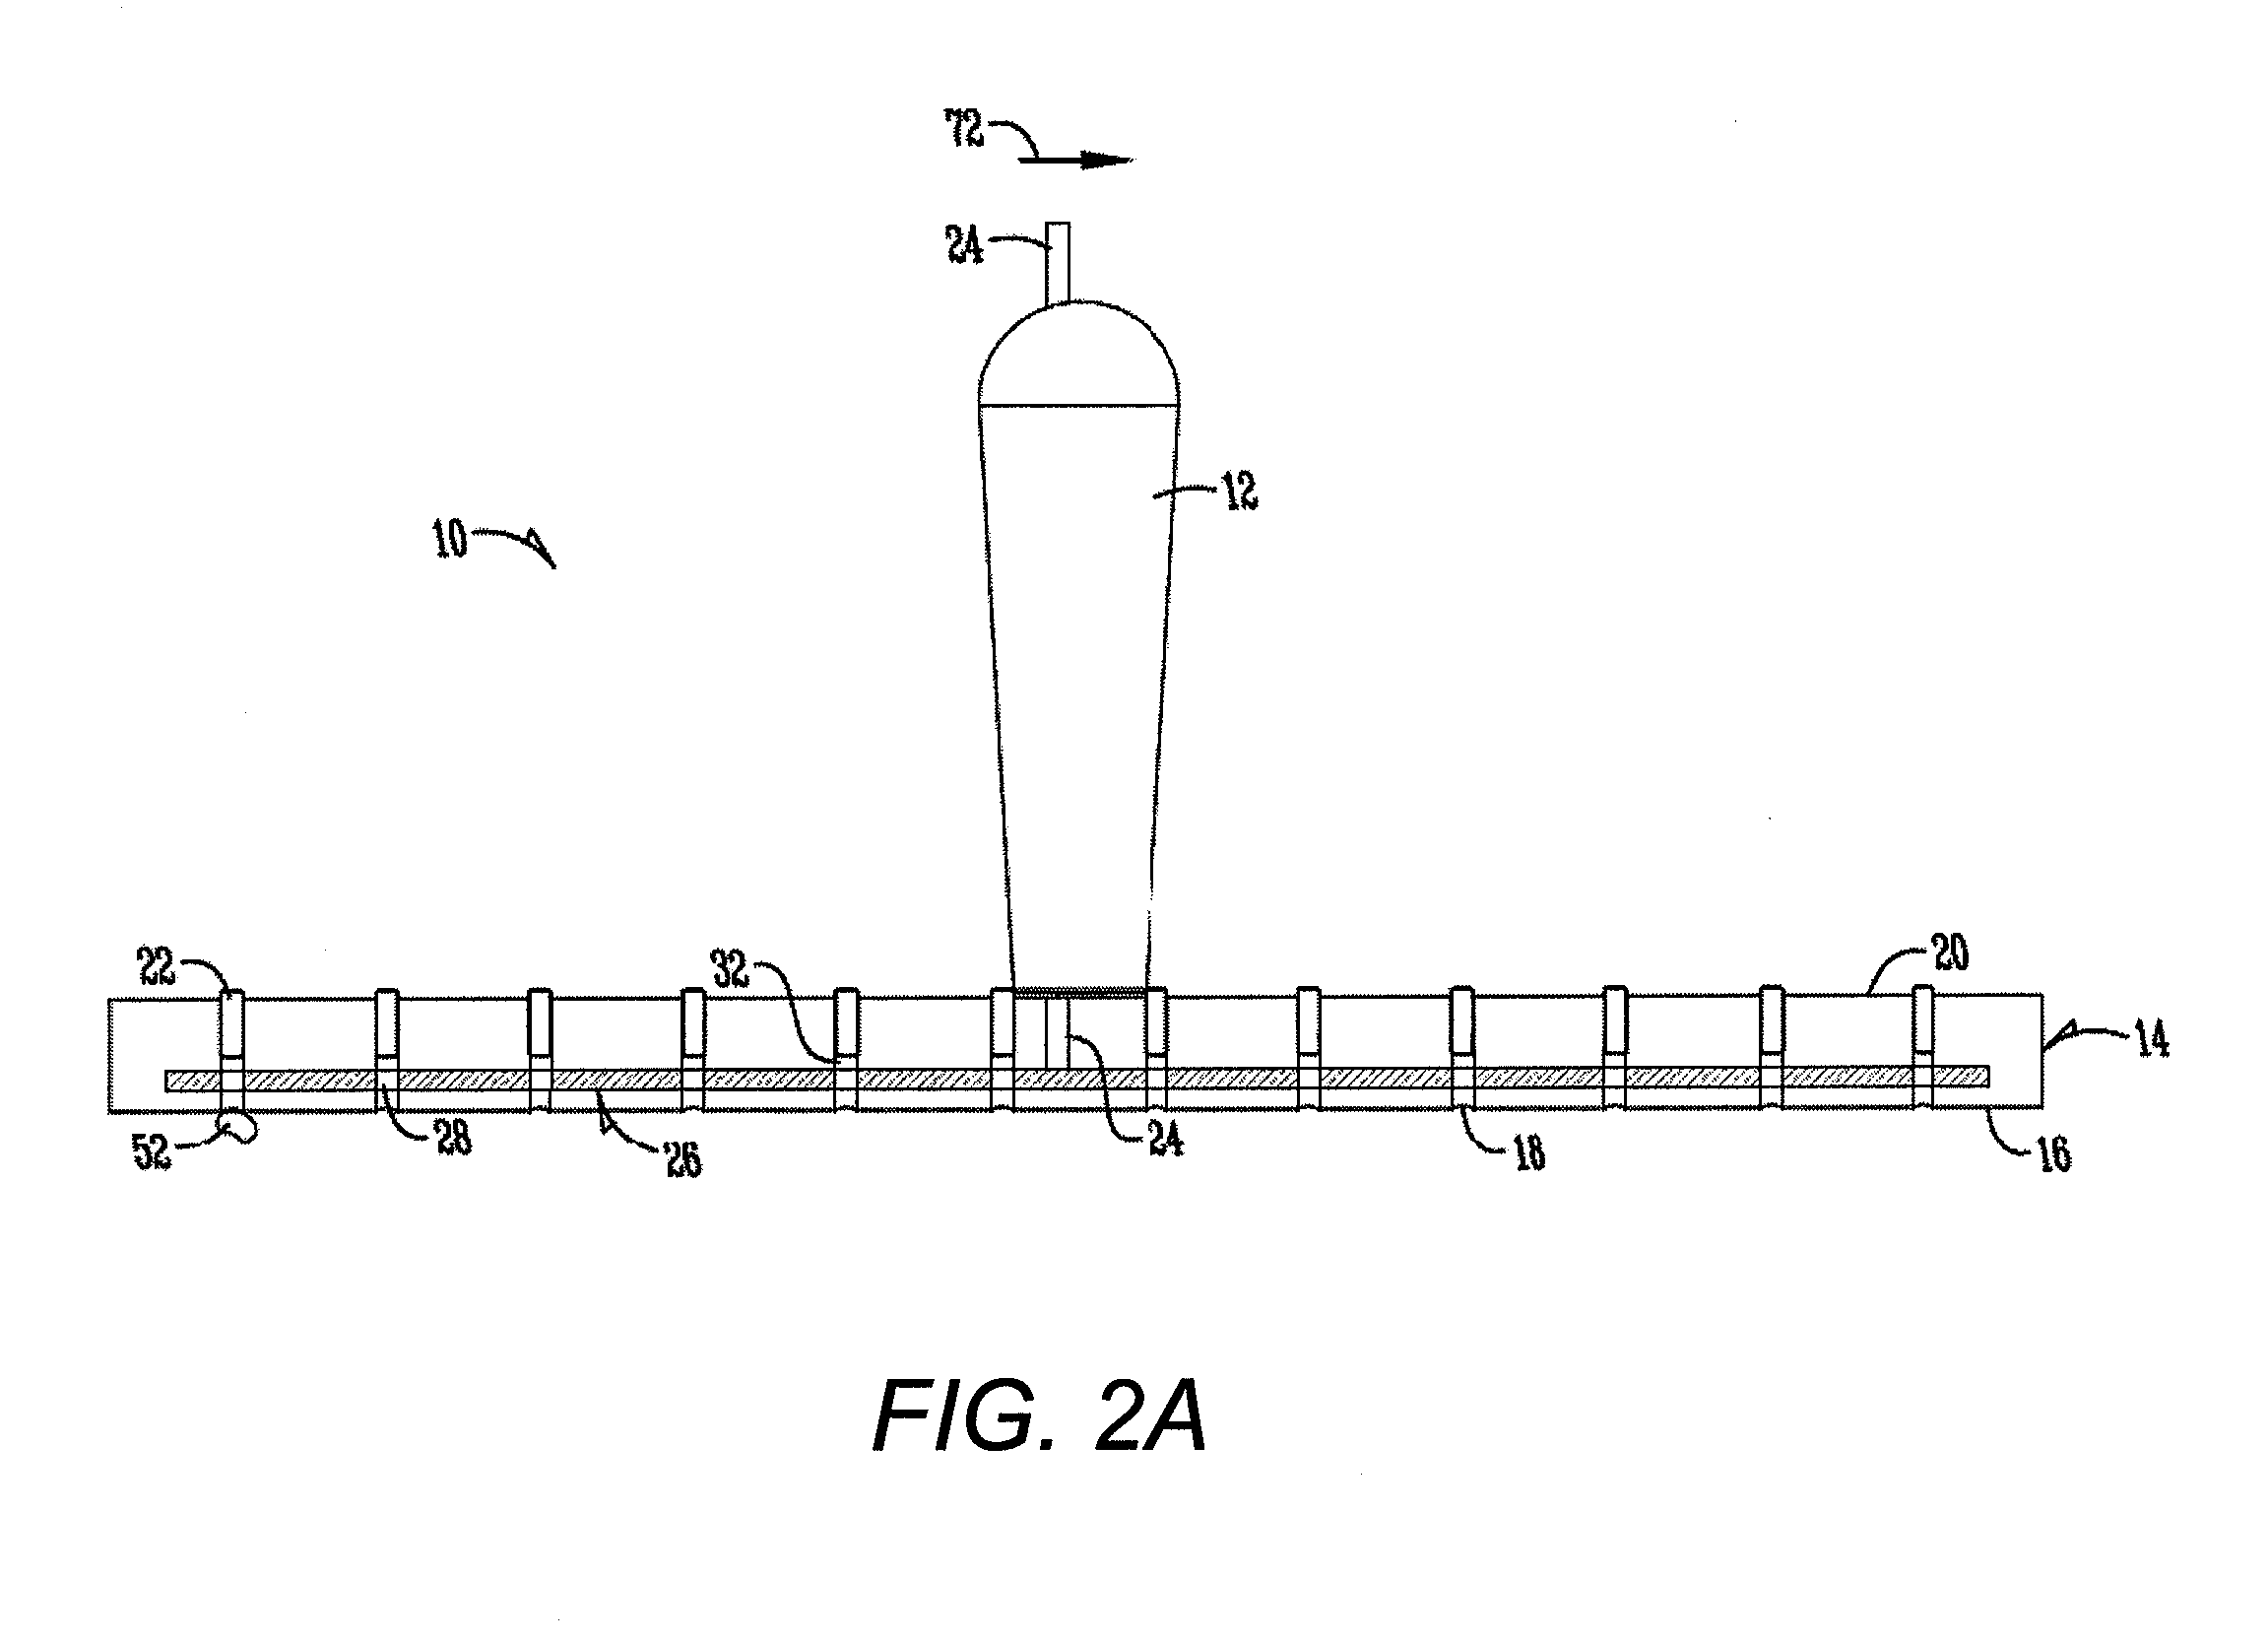 Apparatus, method and system for simultaneously picking up and releasing objects in bulk